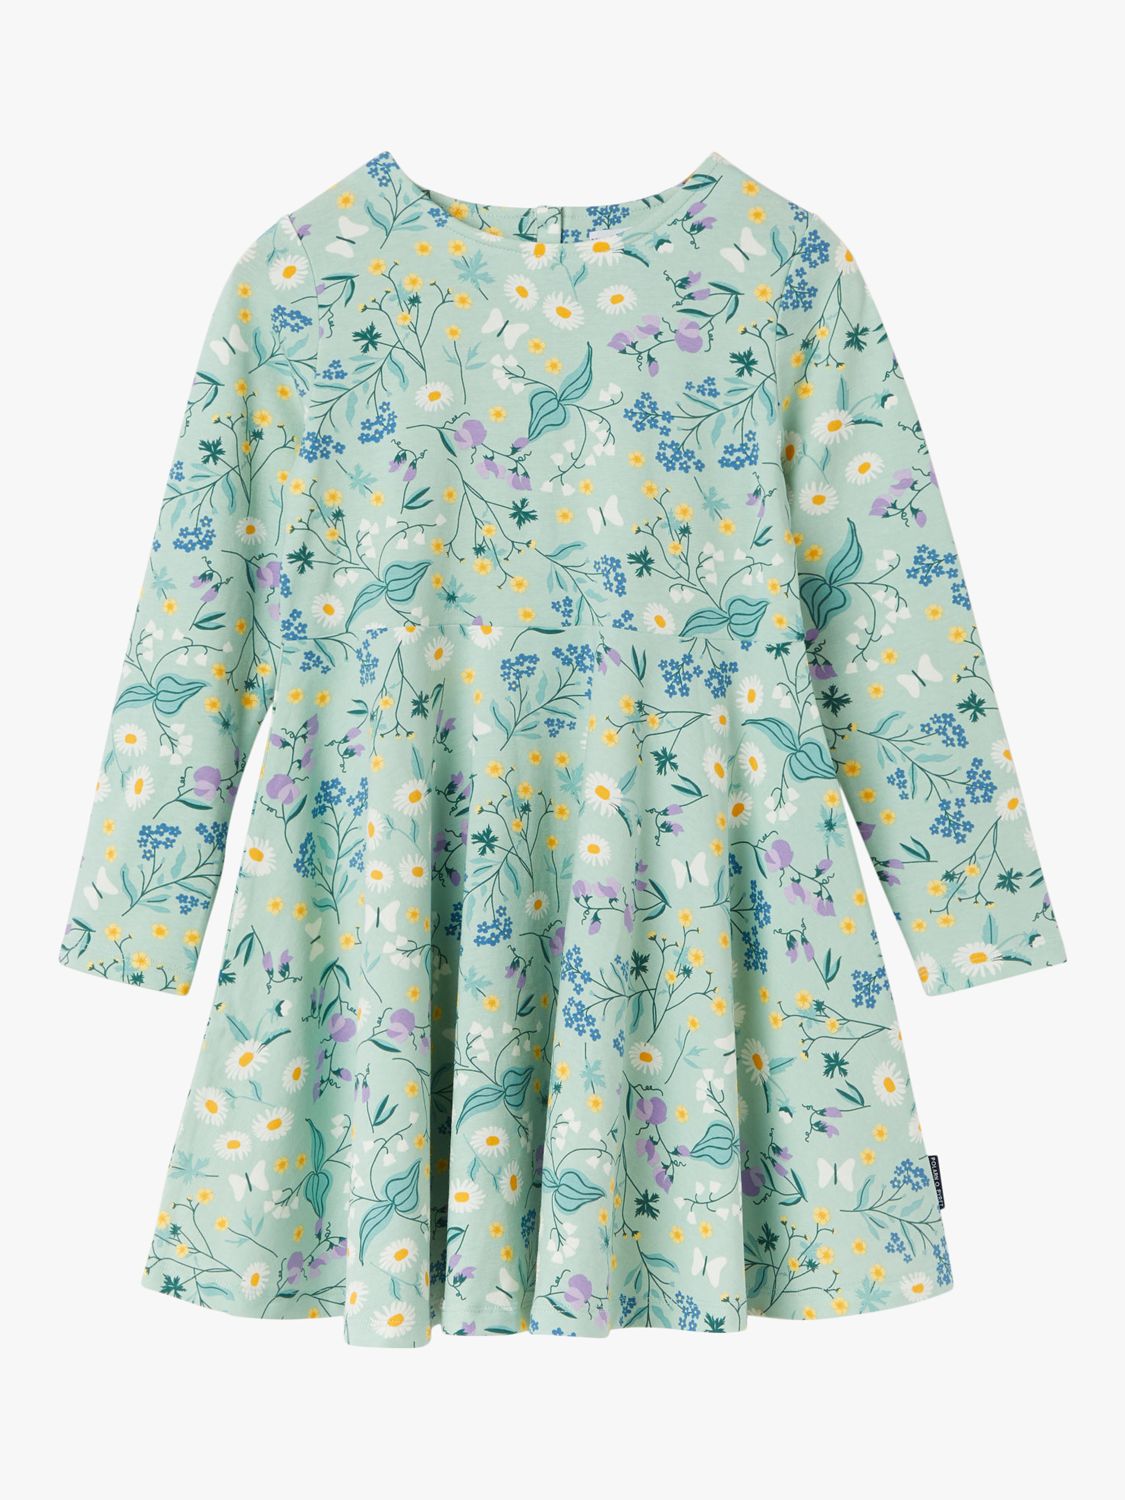 Buy Polarn O. Pyret Baby Floral Pleated Dress, Blue Online at johnlewis.com